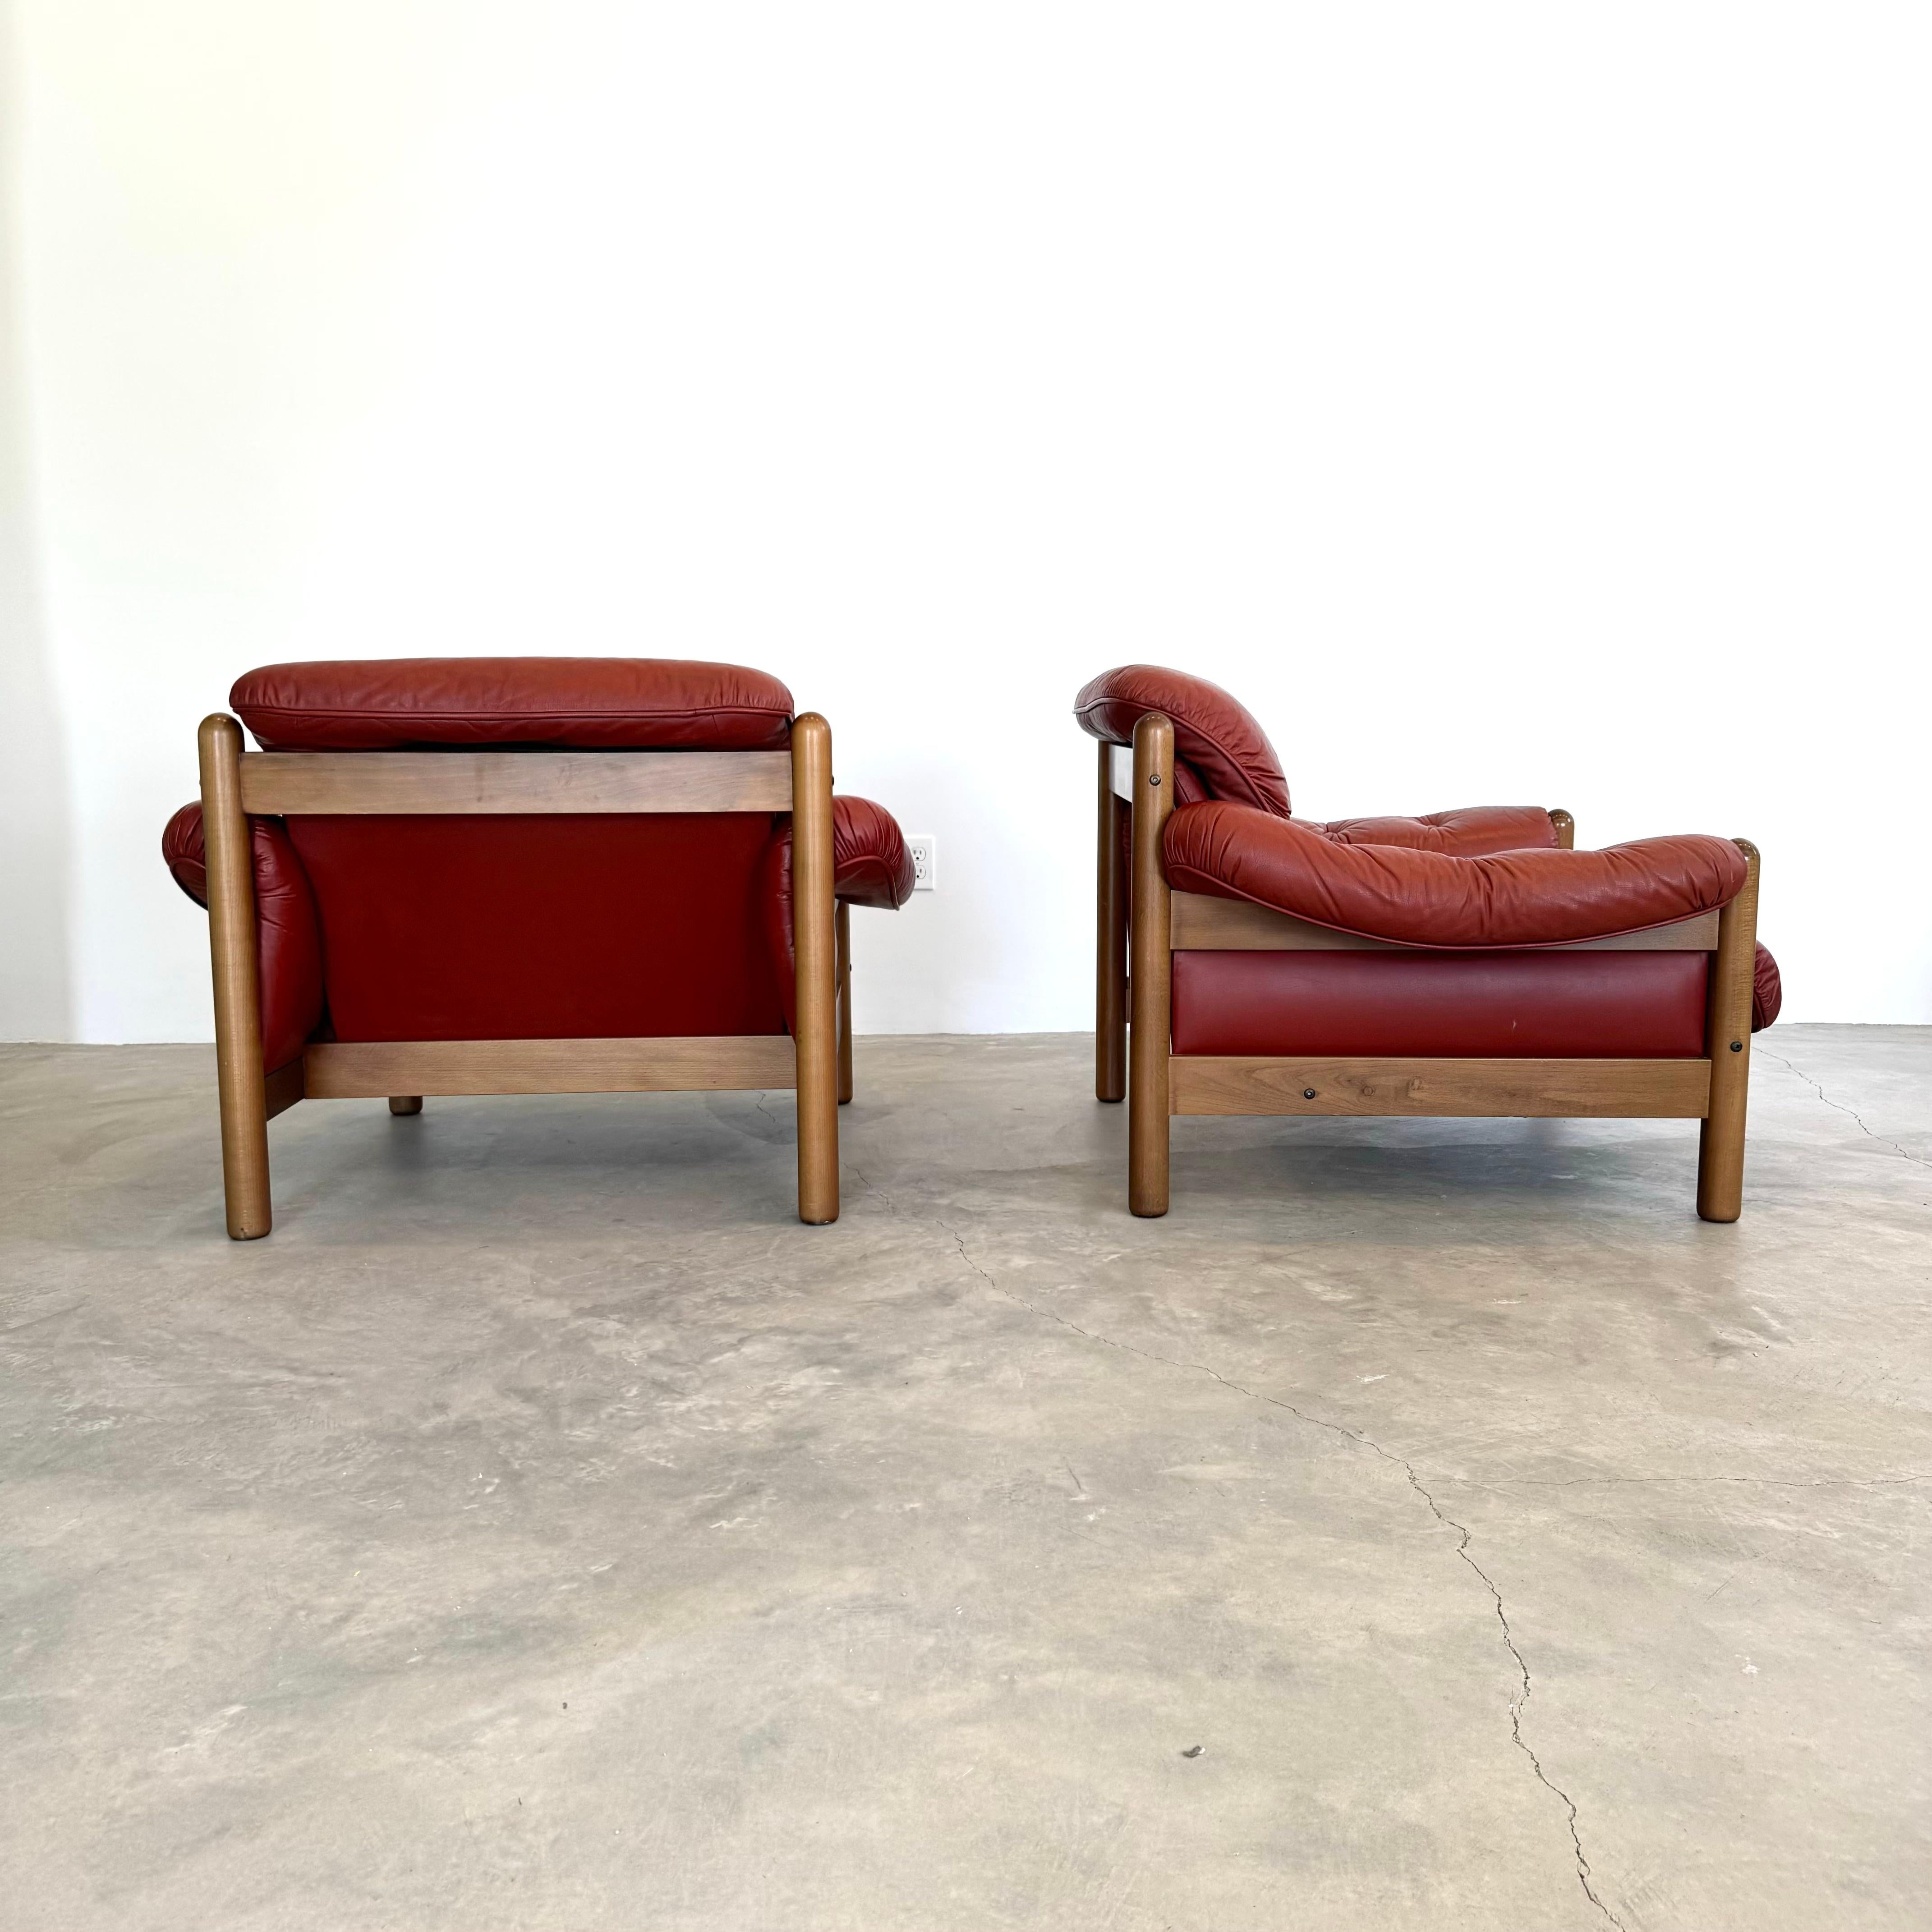 Late 20th Century  Leather and Wood Club Chairs, Sweden 1970s